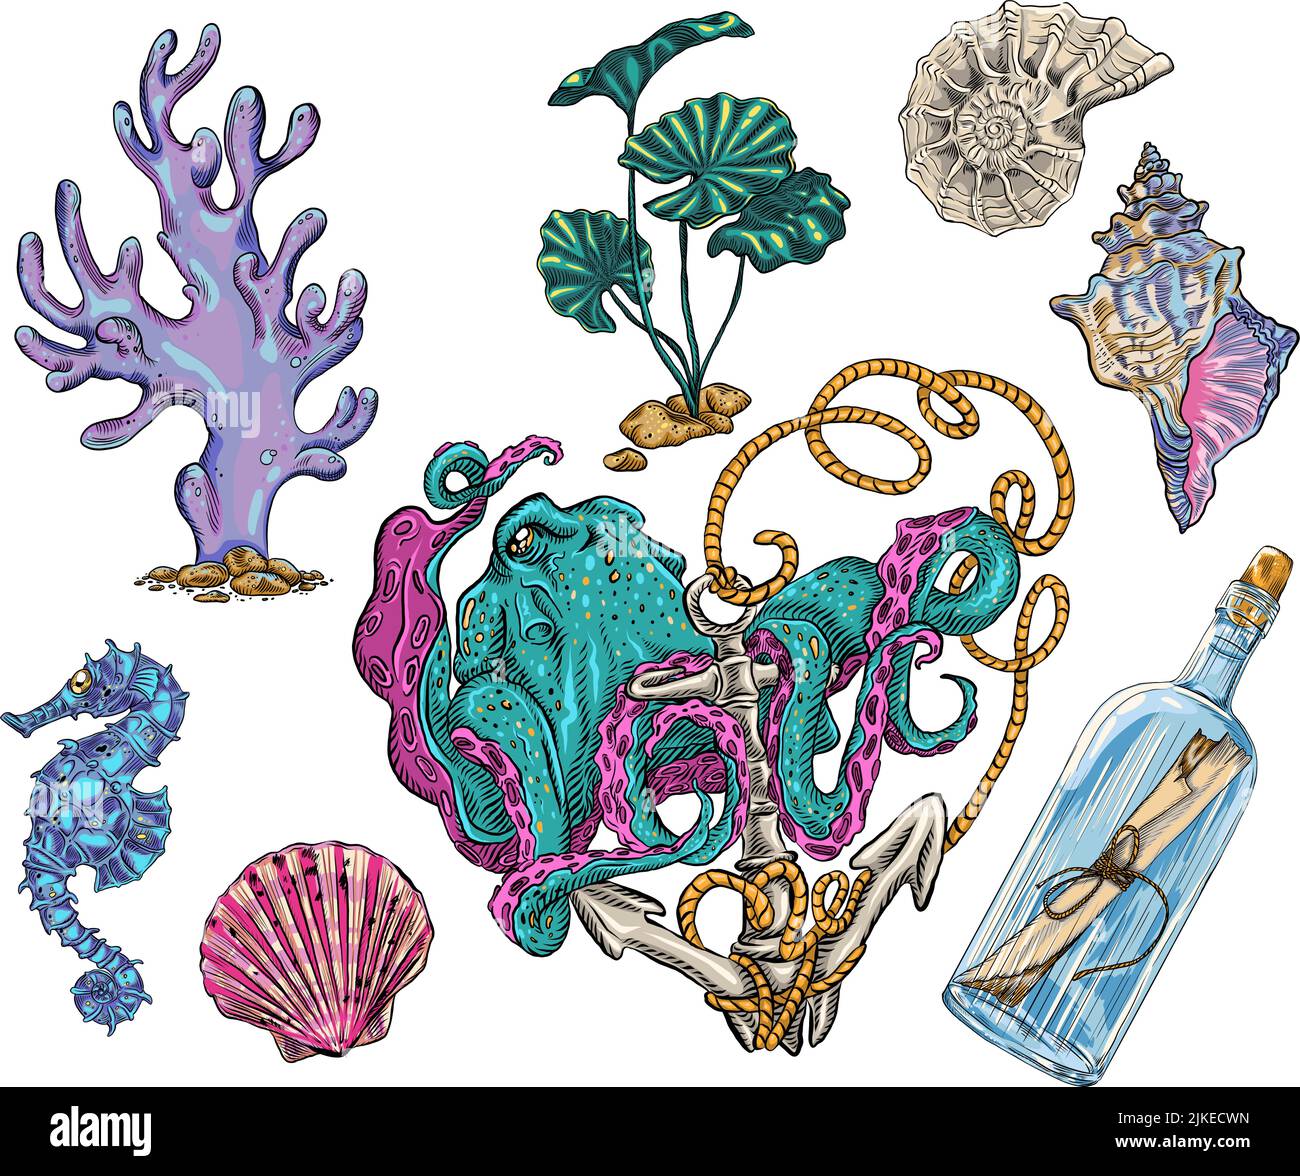 Vintage hand drawn octopuses, sunken anchors, seashells, waterweeds and seahorses. Seabed Attributes Stock Vector